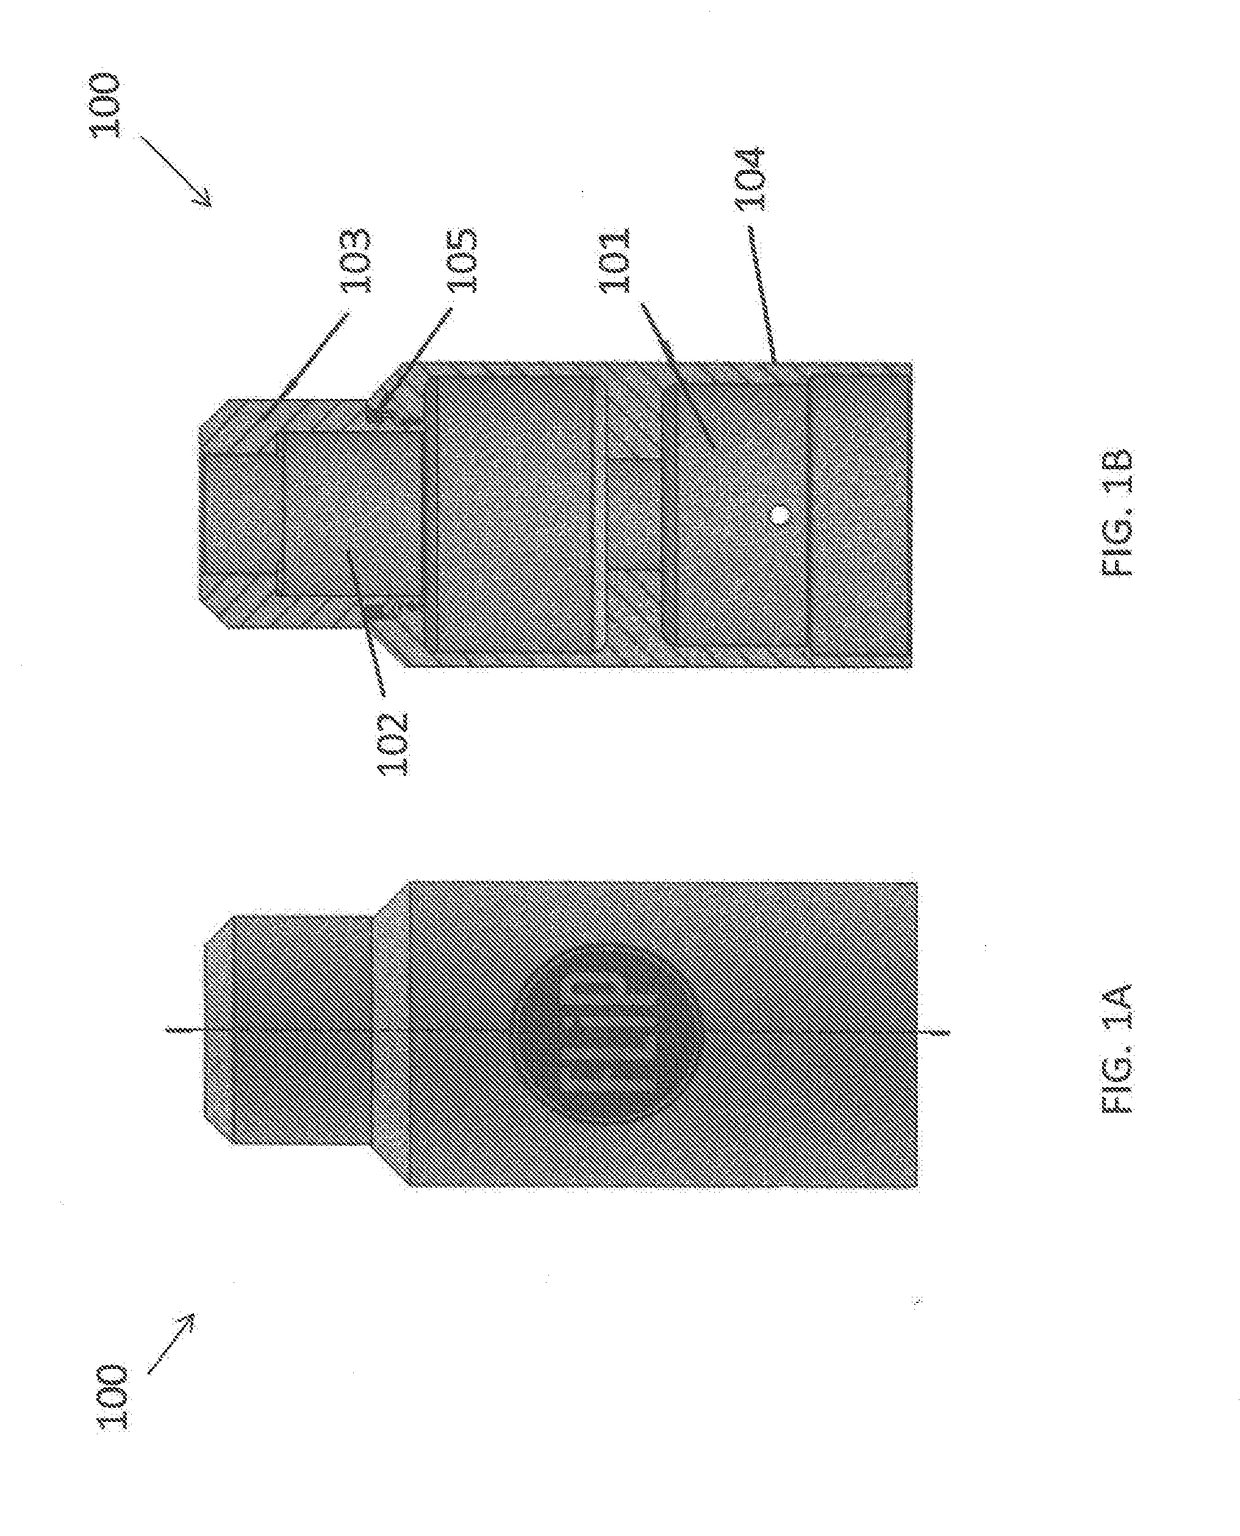 Enhanced Modular Electronic Cigarette Assembly with Disposable Elements Including Tanks